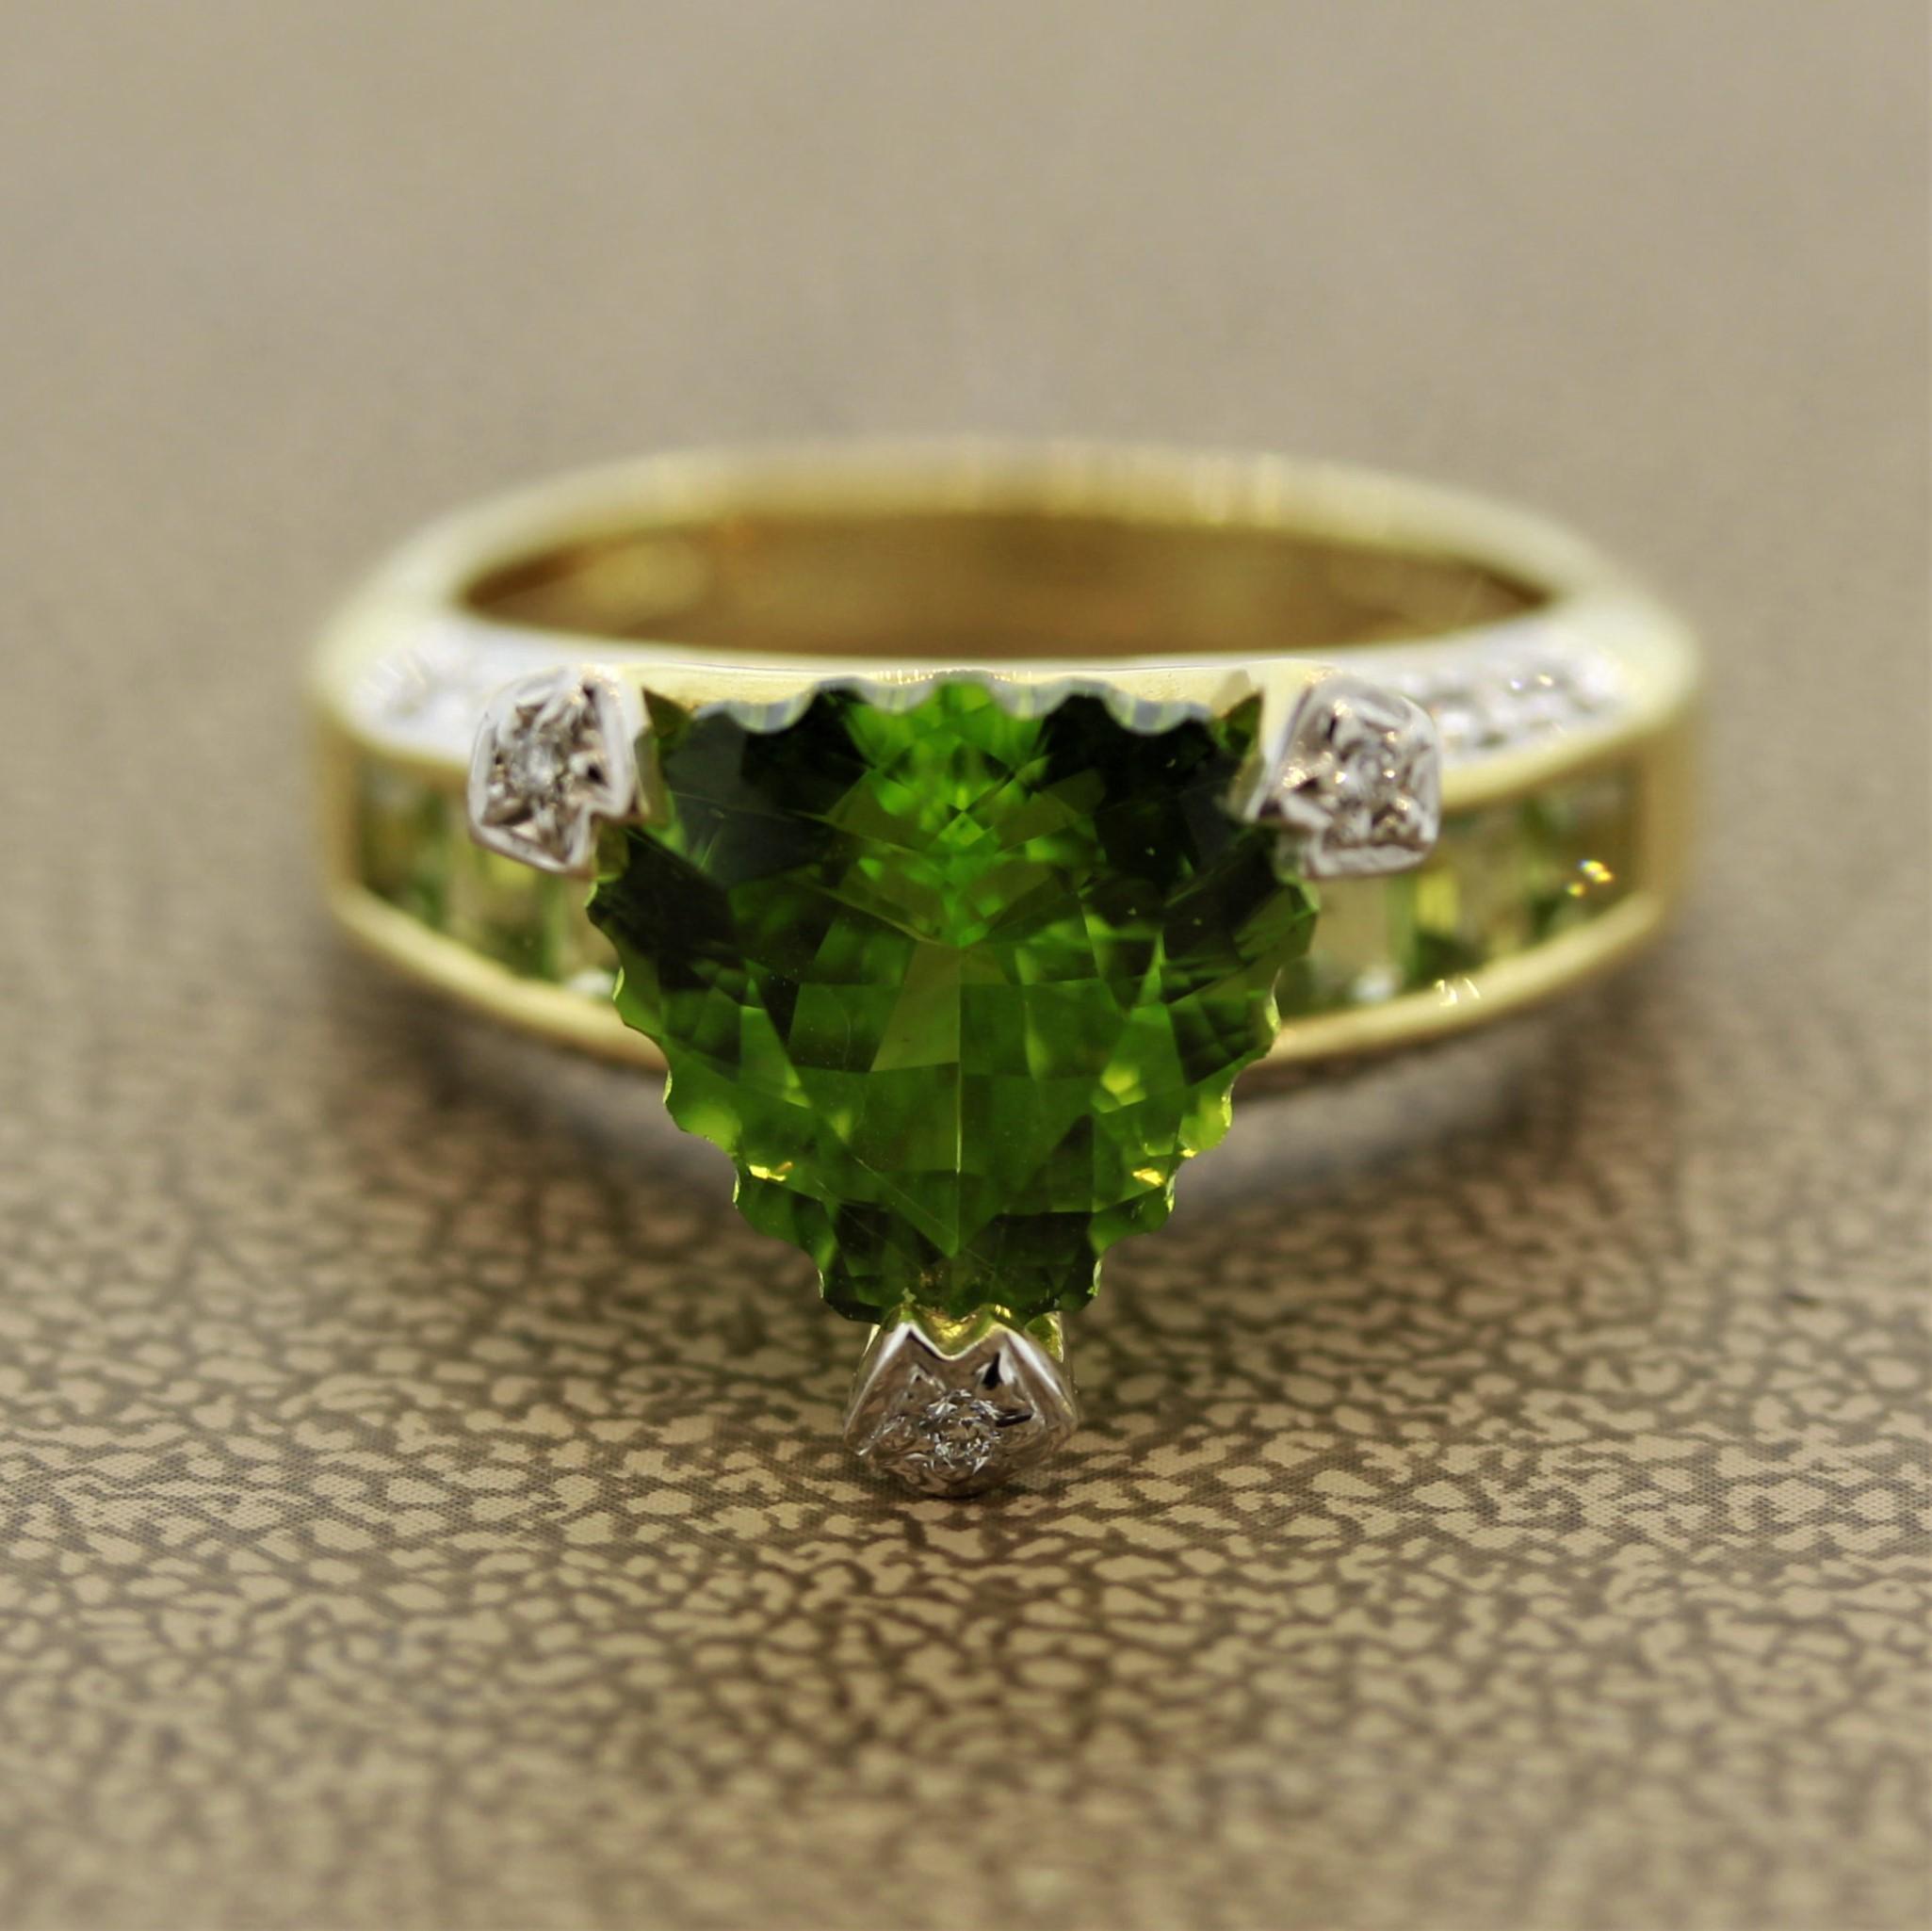 A unique ring by Italian designer Bellarri. It features a total of 5.90 carats of bright and lively peridot. The center and largest peridot is cut as a fancy trillion cut with ridges on its girdles. Cut and polished by a master lapidary. Adding to